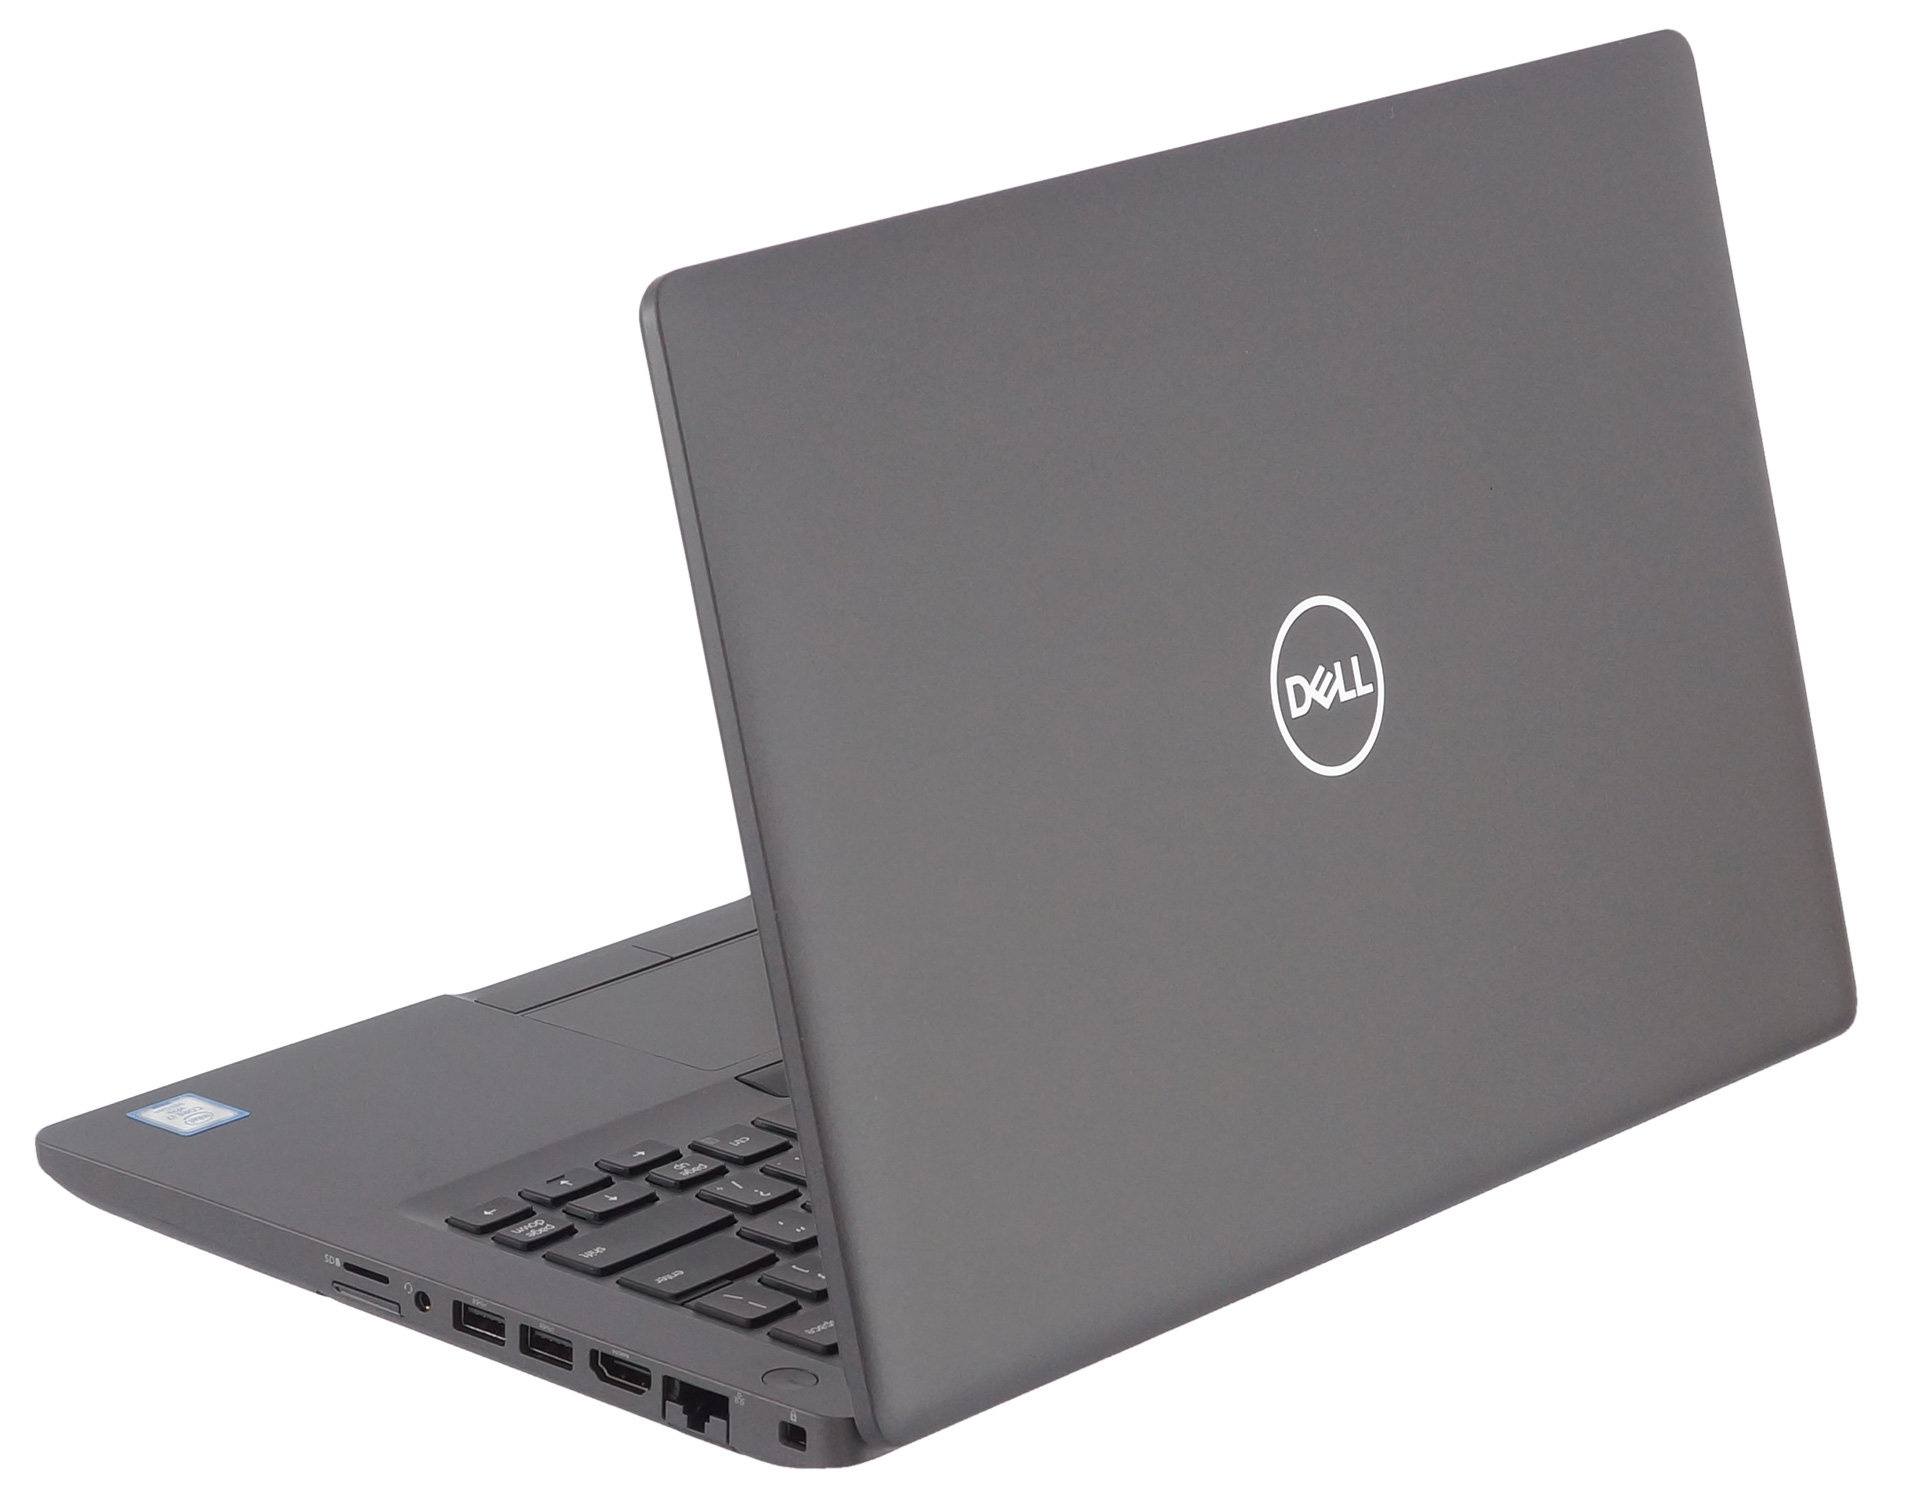 Dell Latitude 5401 review - a business notebook that packs a punch